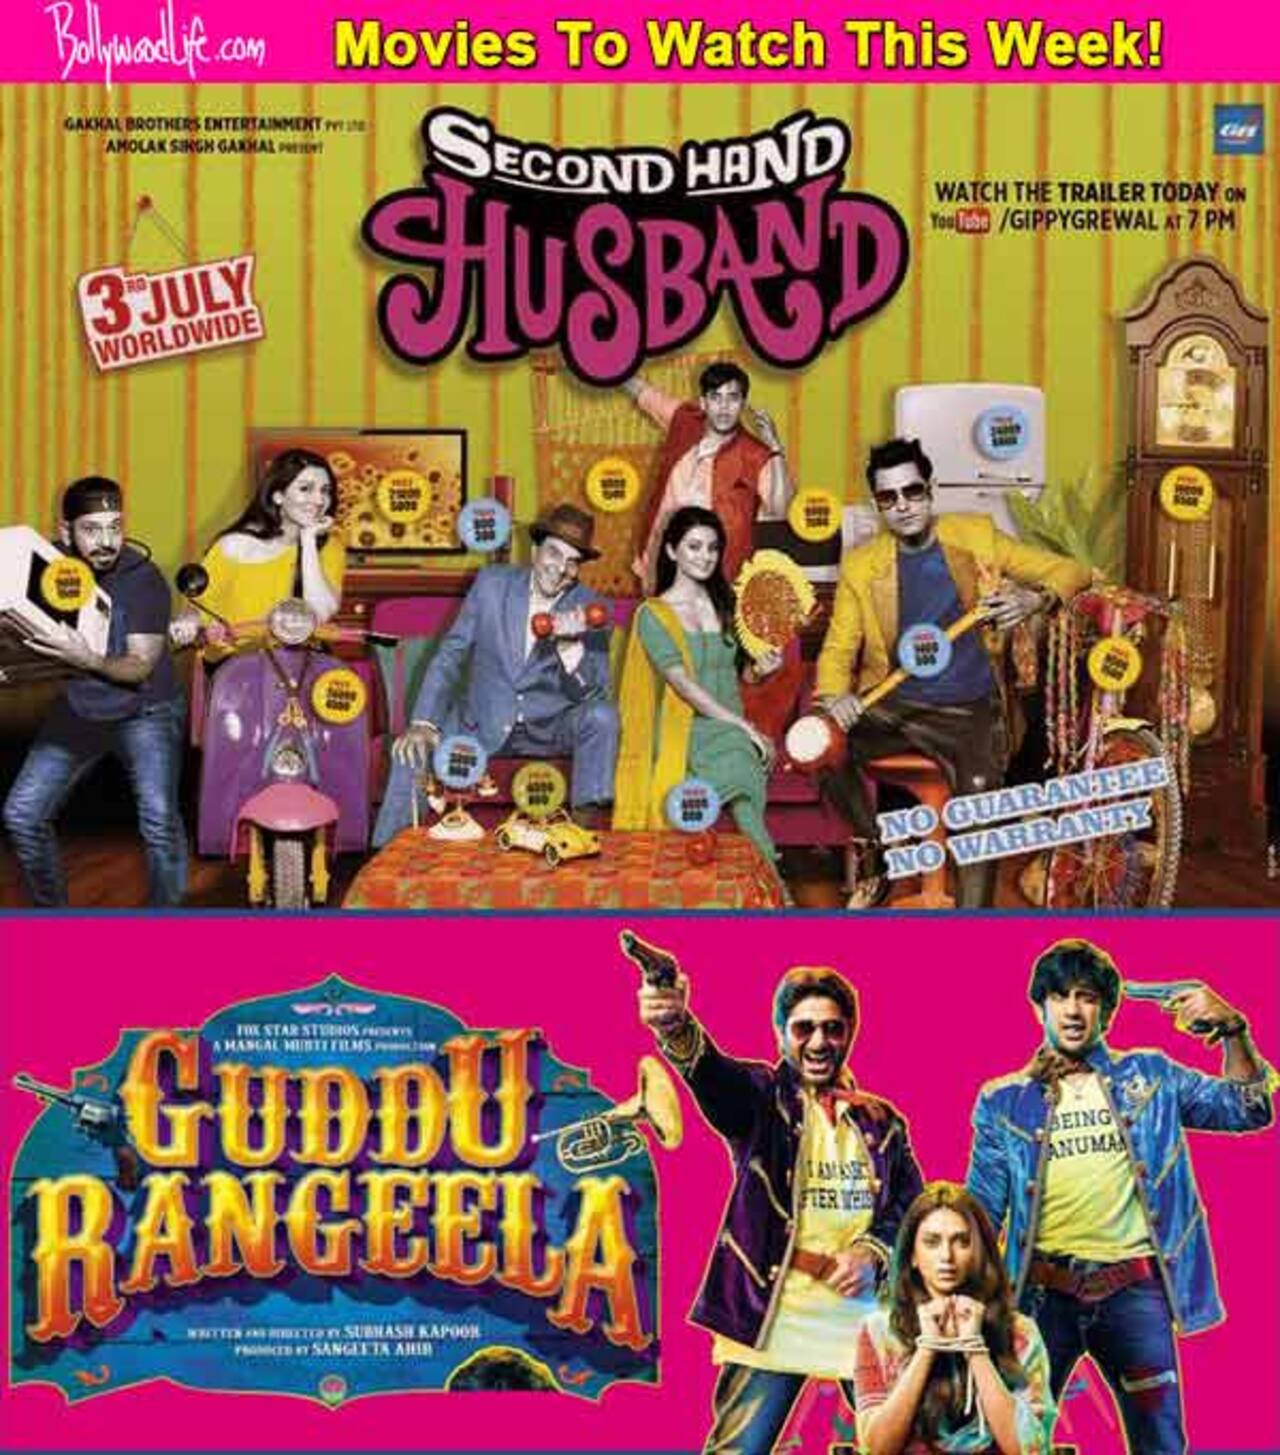 Movies to watch this week: Guddu Rangeela and Second Hand Husband! -  Bollywood News & Gossip, Movie Reviews, Trailers & Videos at  